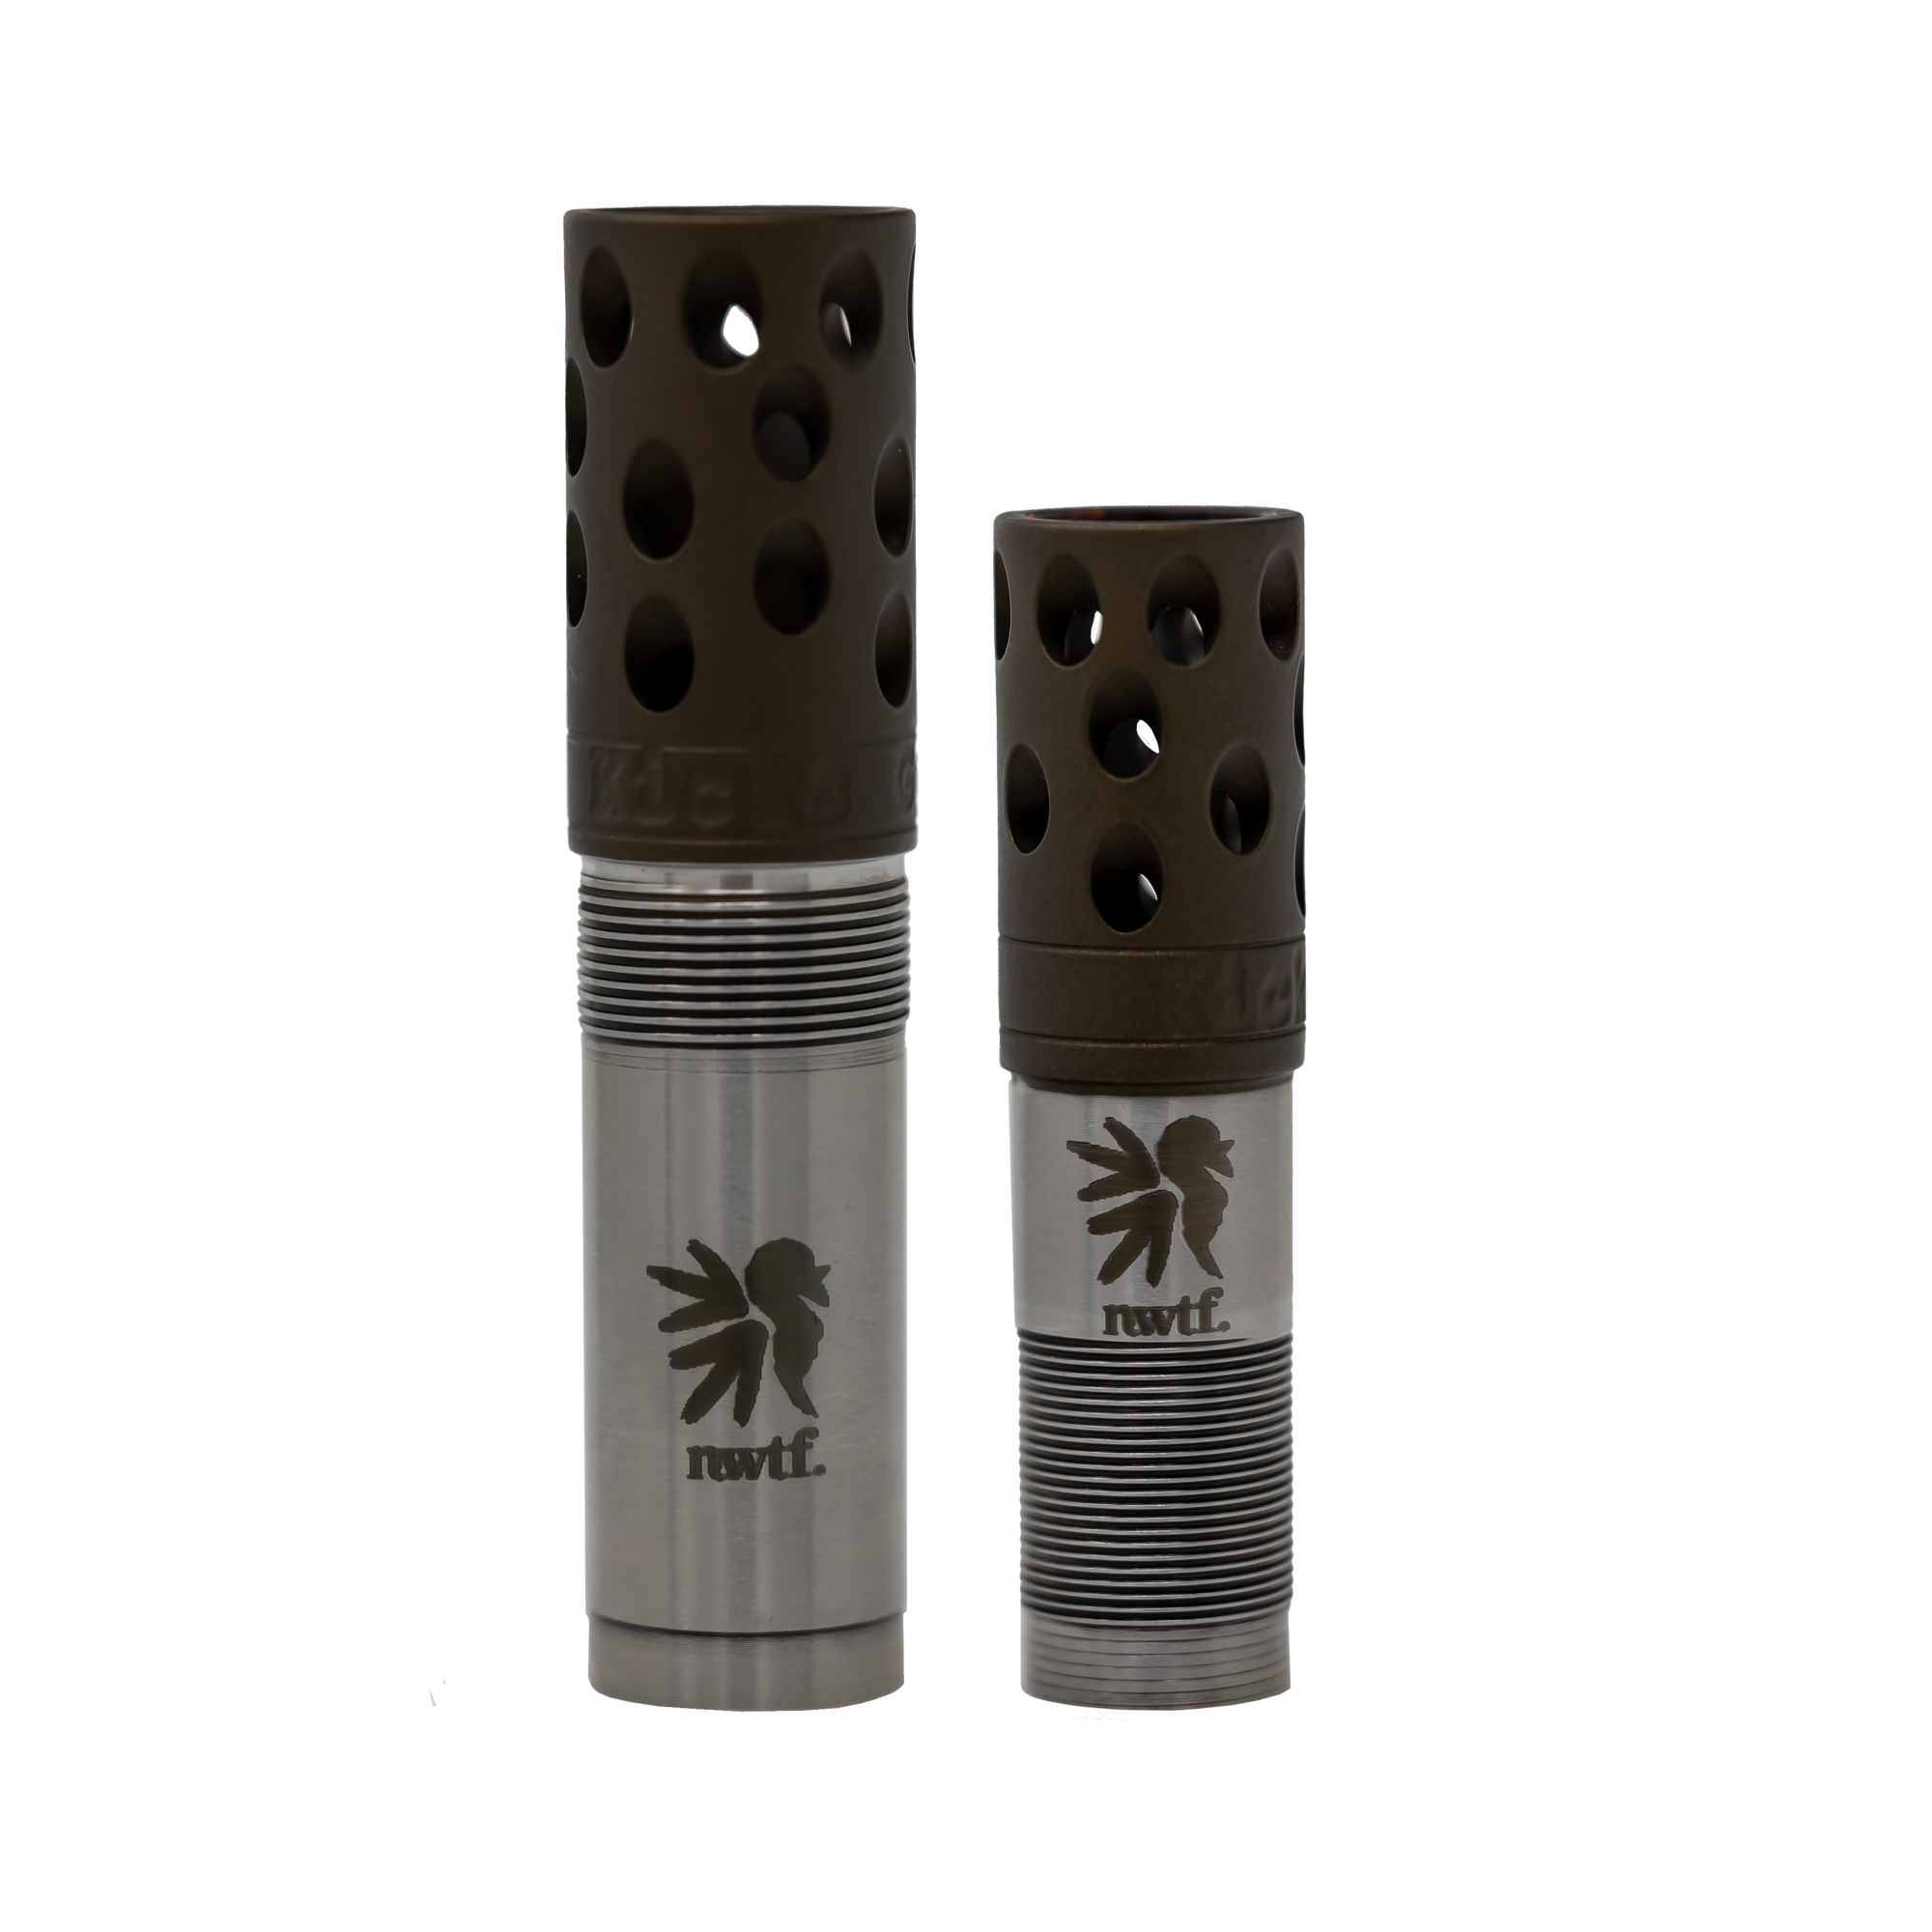 NWTF Official Turkey Choke Tubes of the NWTF